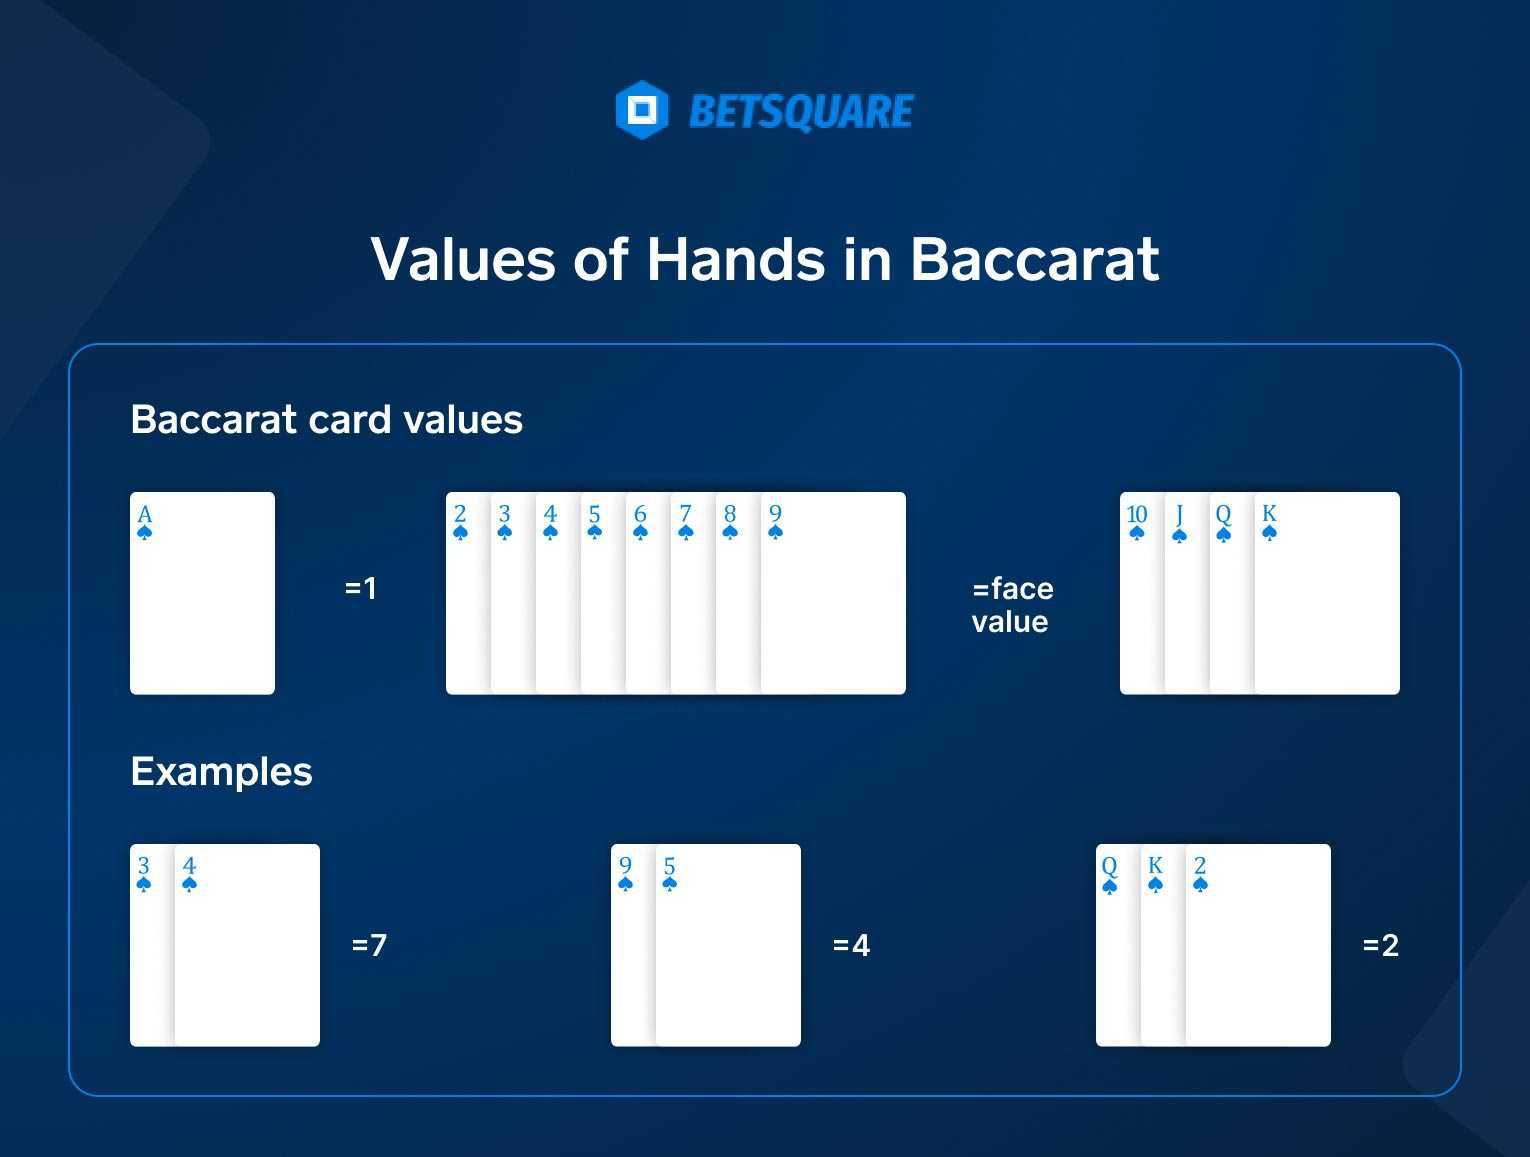 Values-of-Hands-in-Baccarat-Betsquare